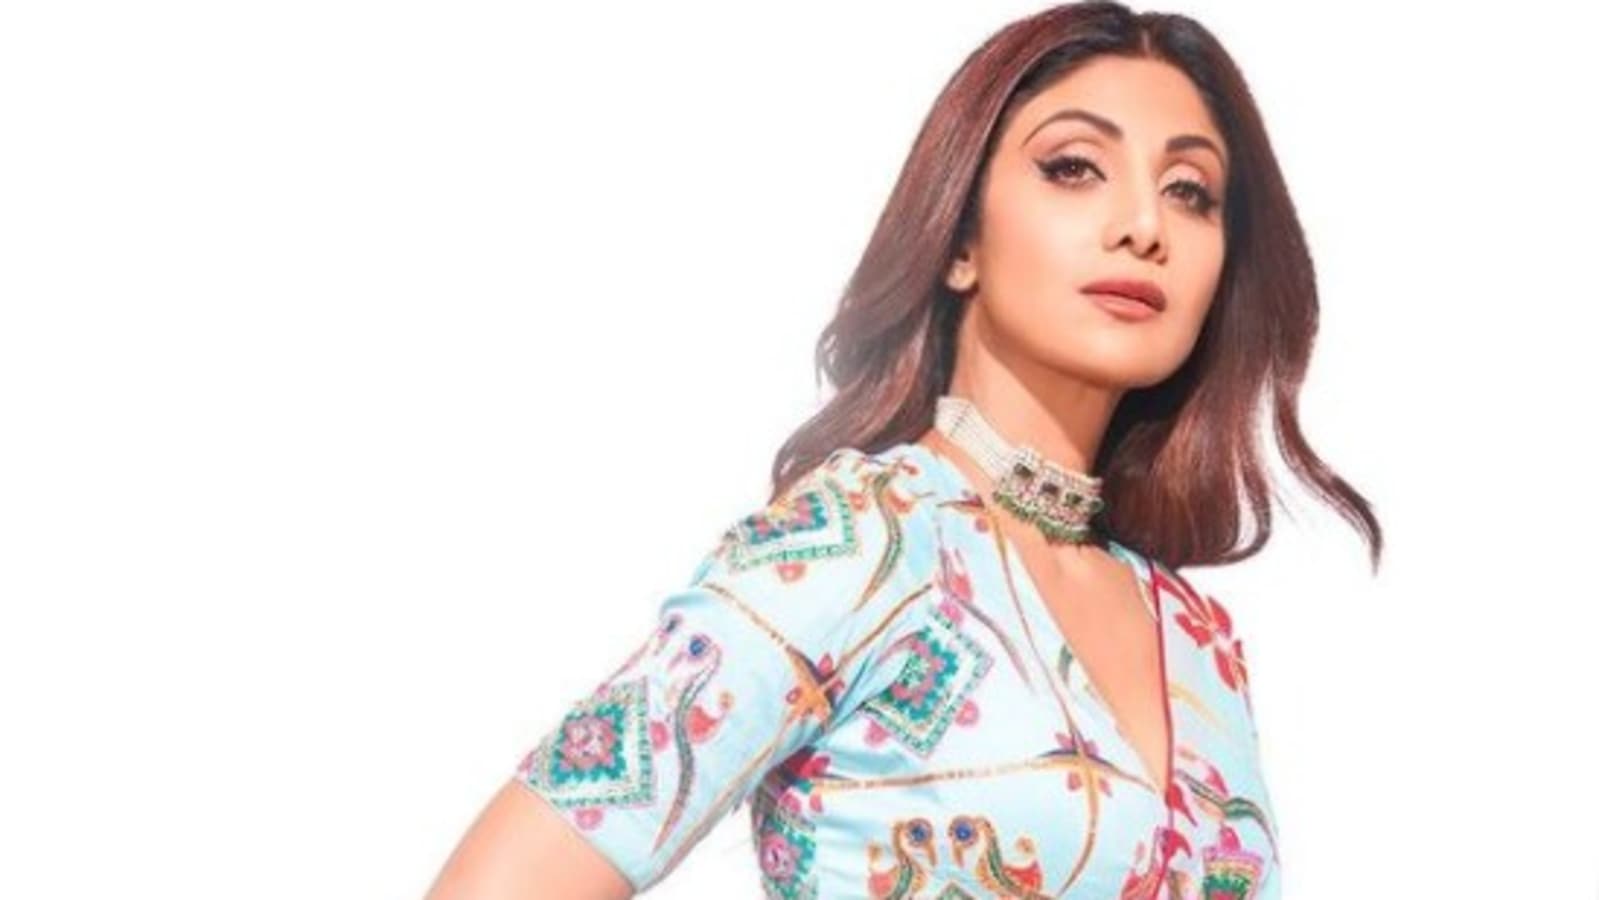 Shilpa Shetty shares pics from first photoshoot after Raj Kundra's arrest,  is 'determined to rise'. See here | Bollywood - Hindustan Times